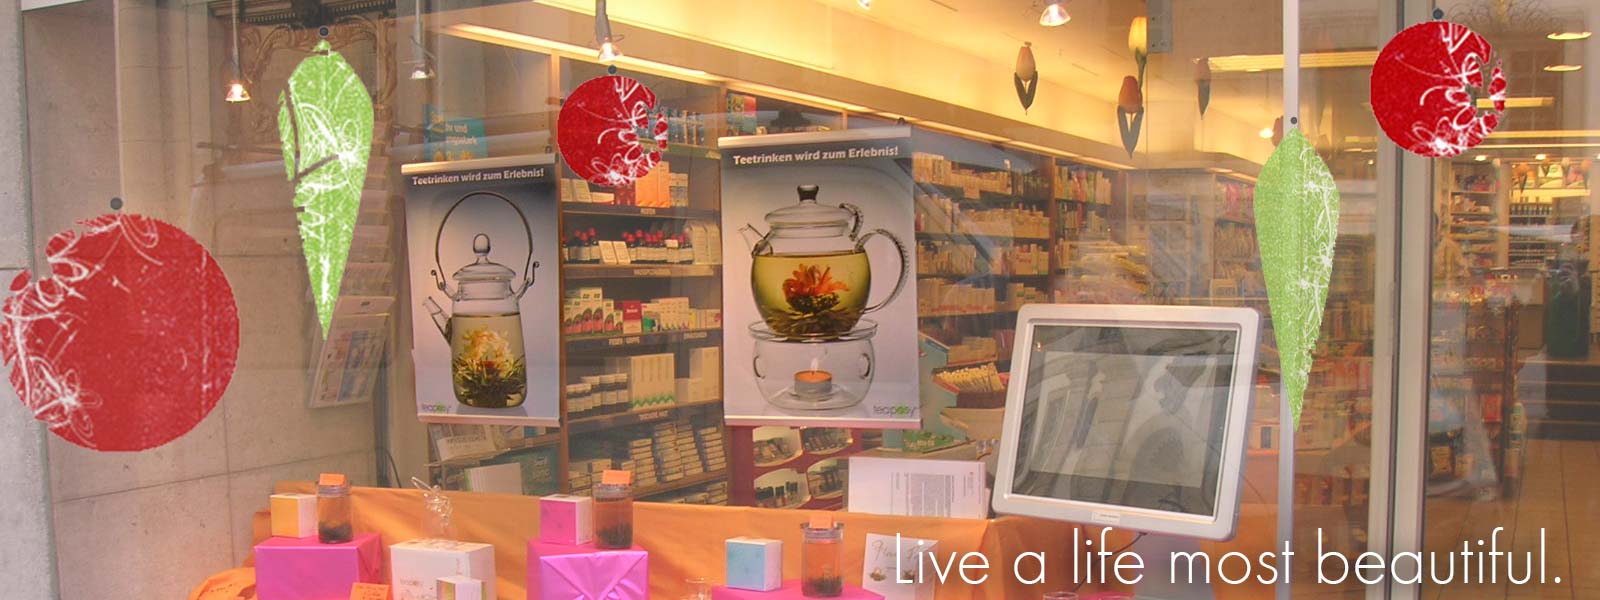 A holiday gift shop window with Teaposy blooming tea posters hanging along with other decorations